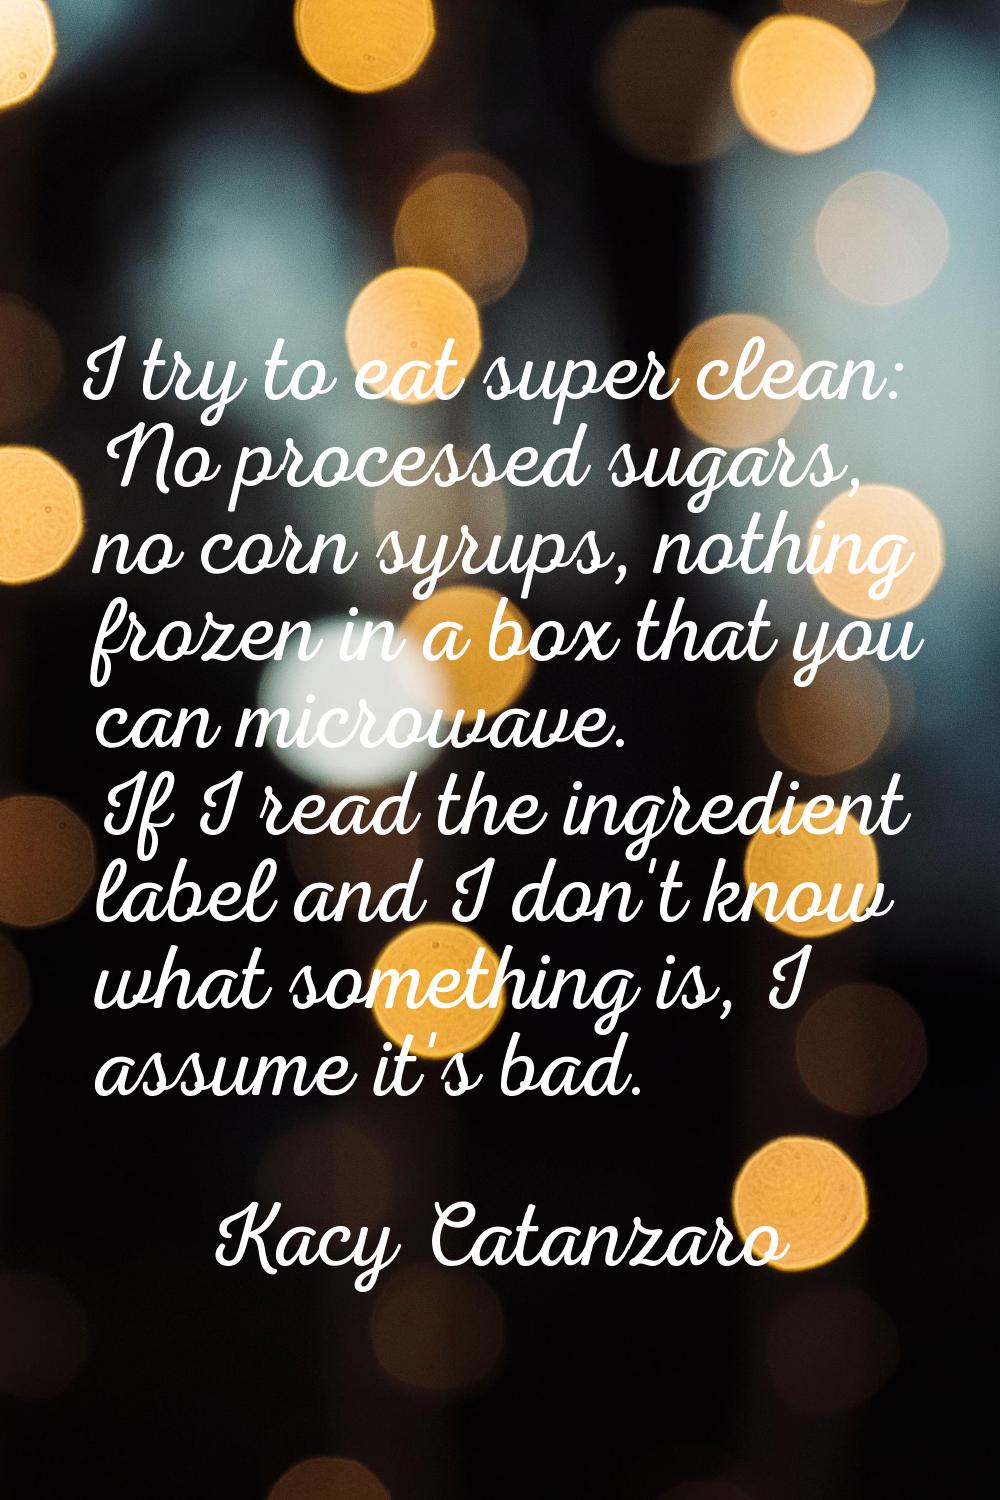 I try to eat super clean: No processed sugars, no corn syrups, nothing frozen in a box that you can